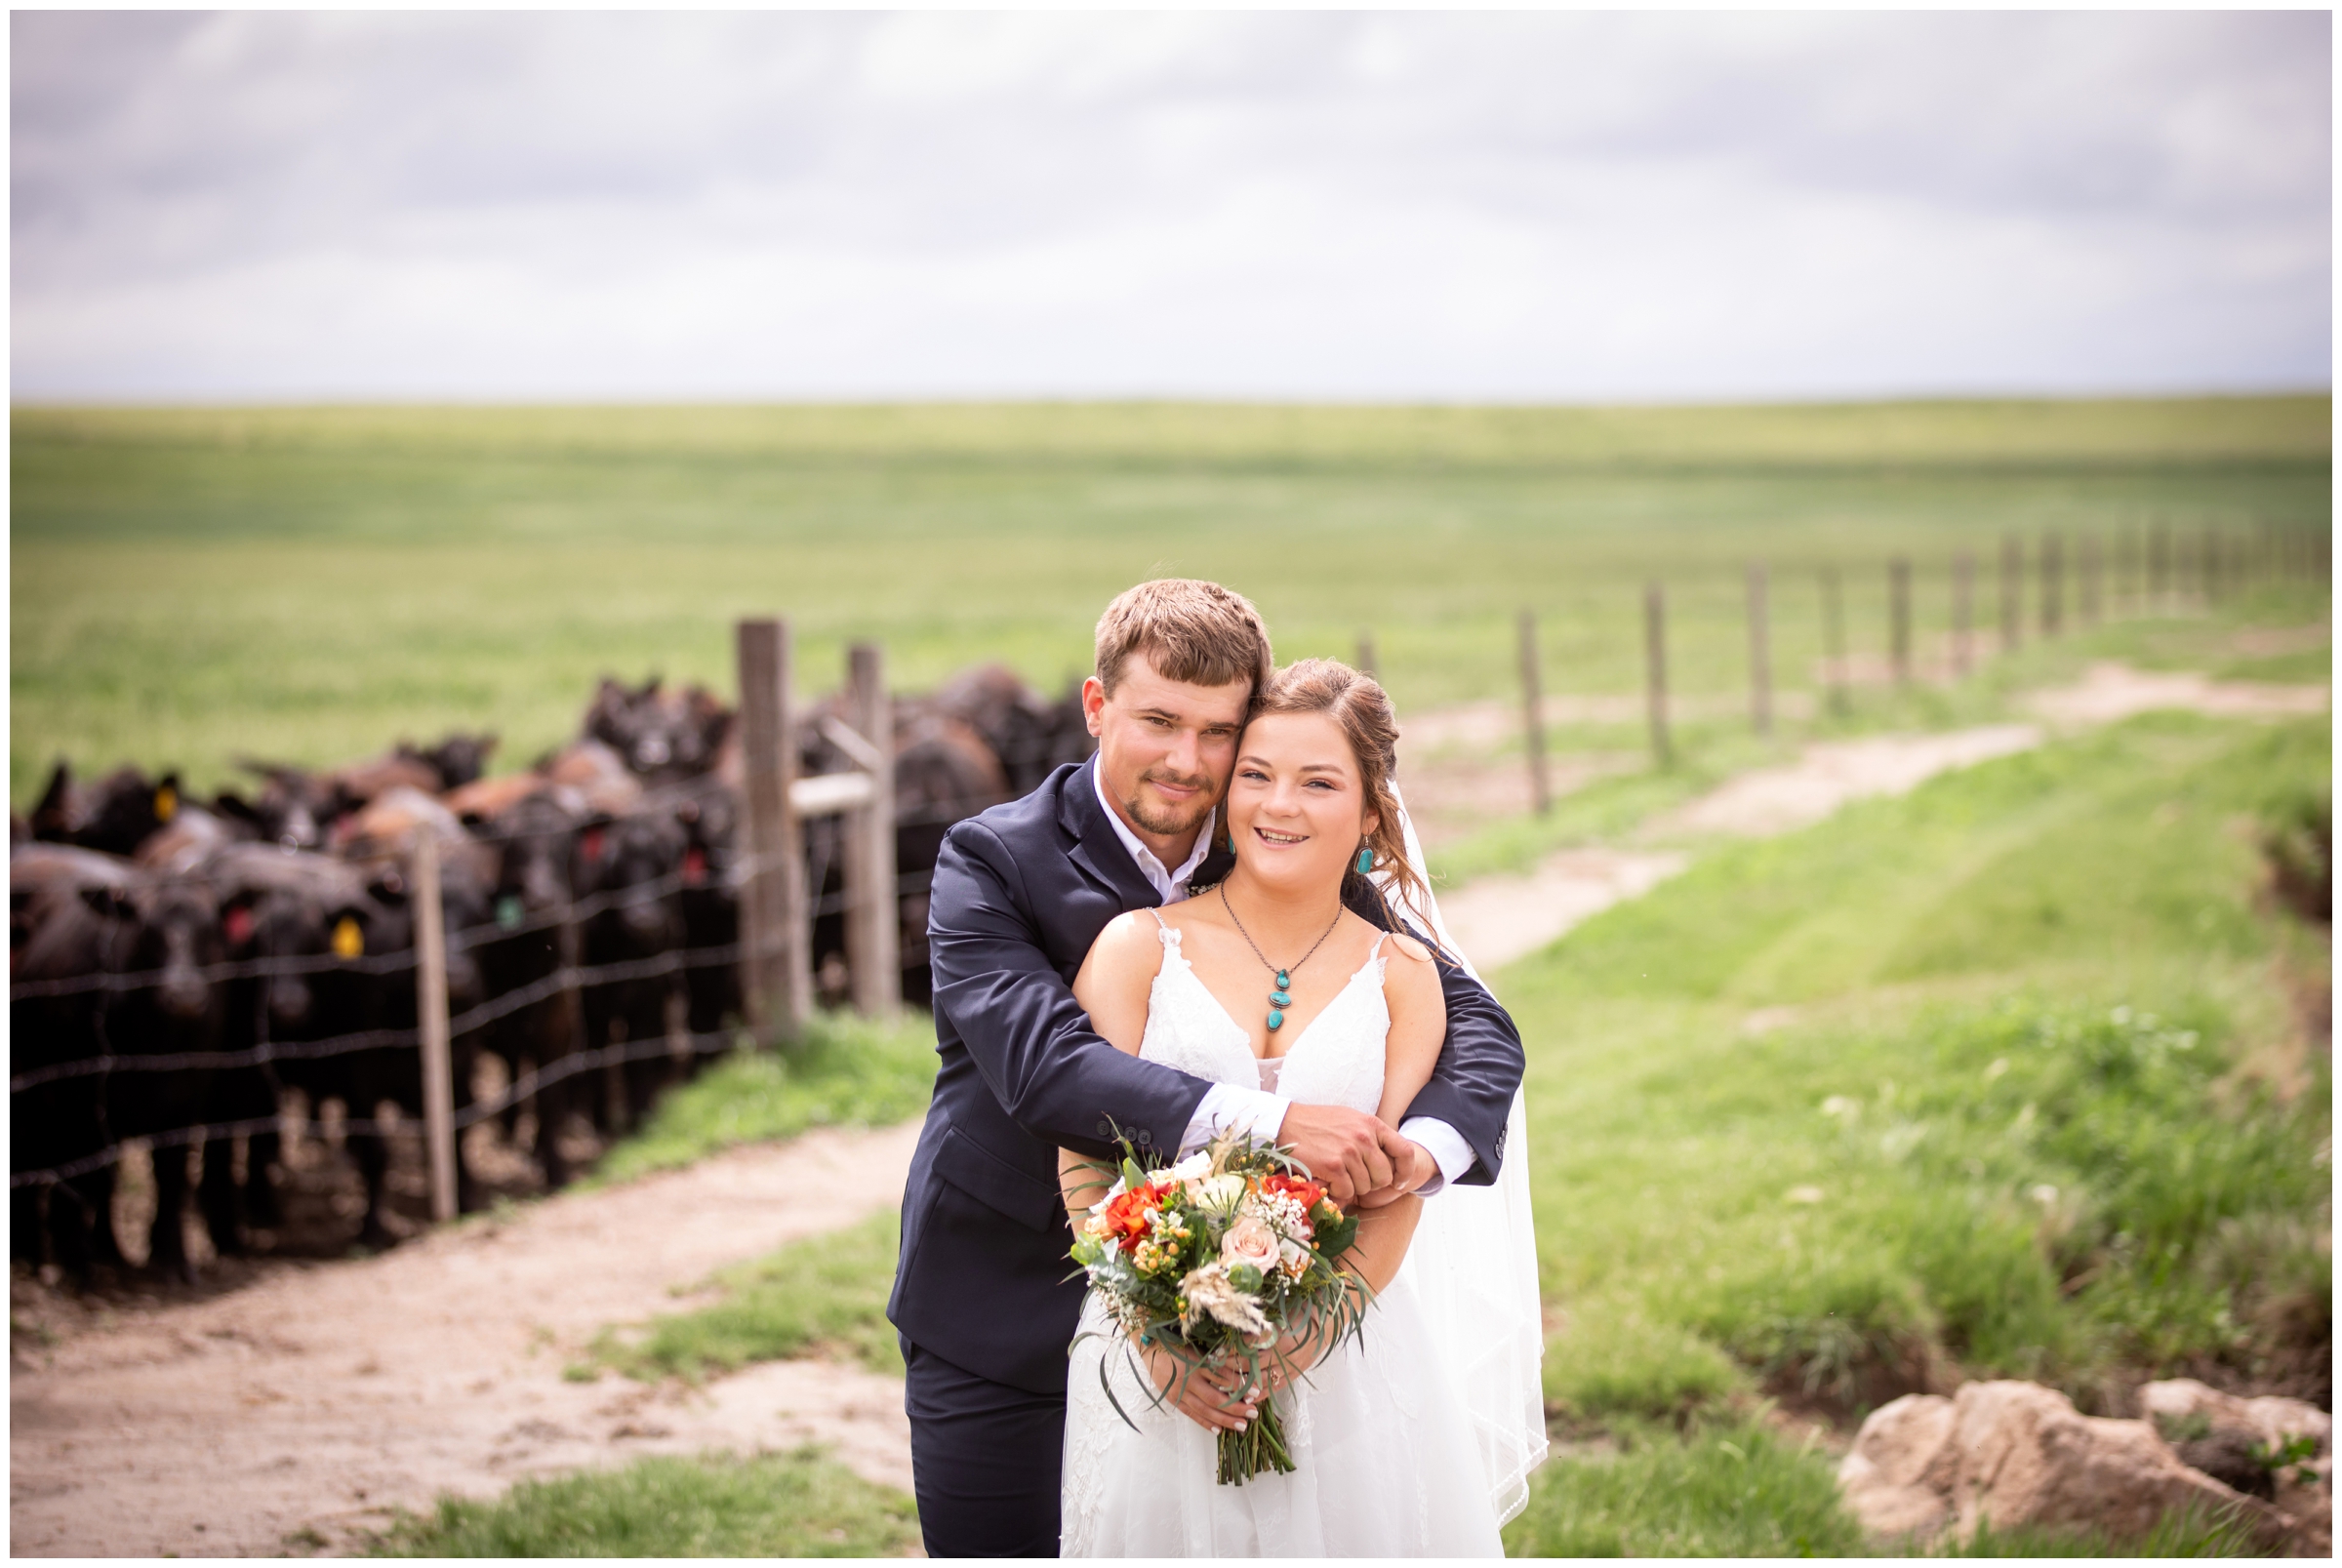 Crook Colorado wedding photos during the summer by rustic wedding photographer Plum Pretty Photography